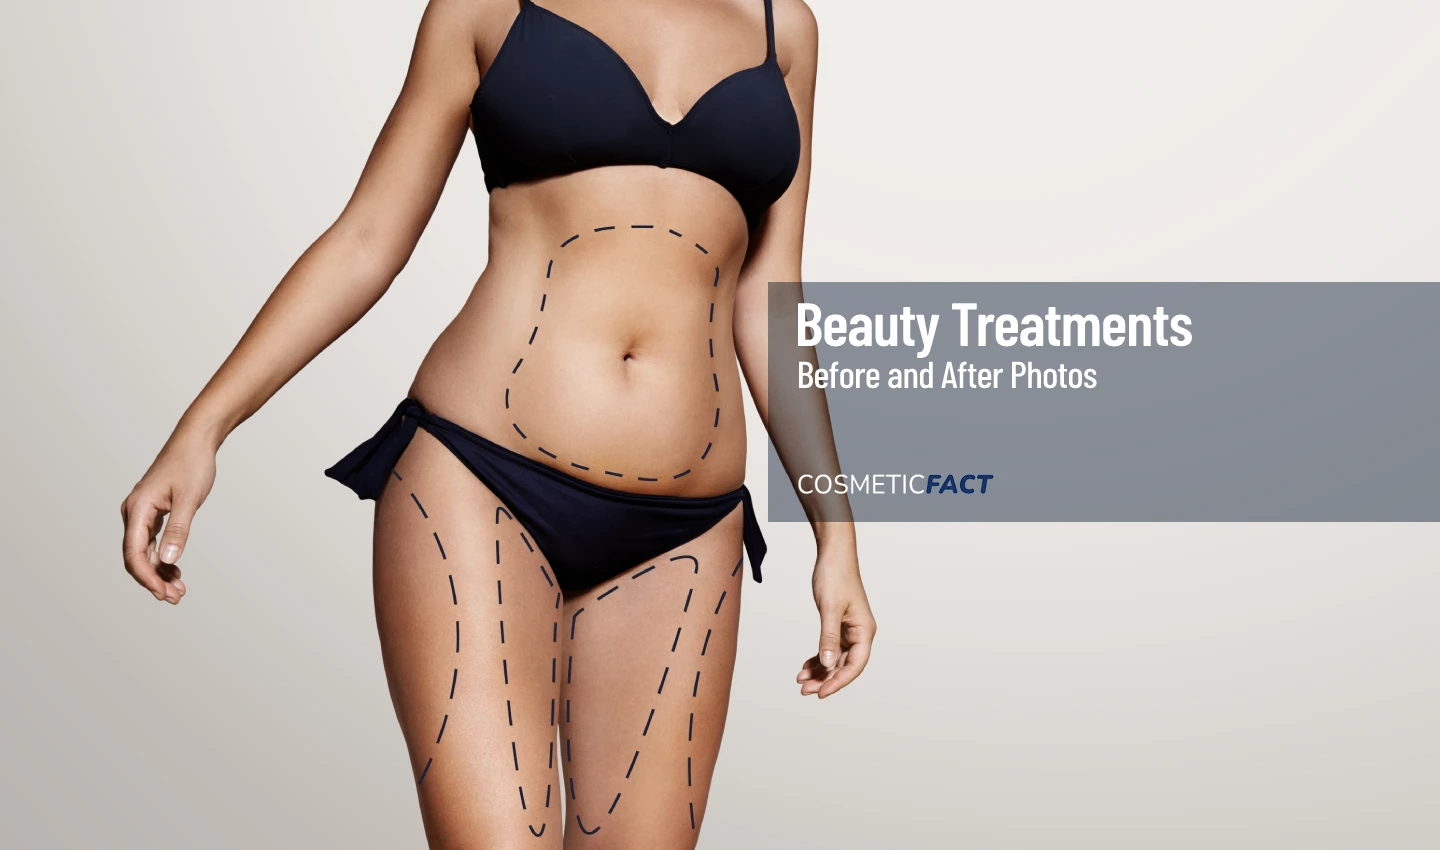 Image of a woman's body with surgical lines representing body contouring surgery, showcasing the transformative power of the procedure.